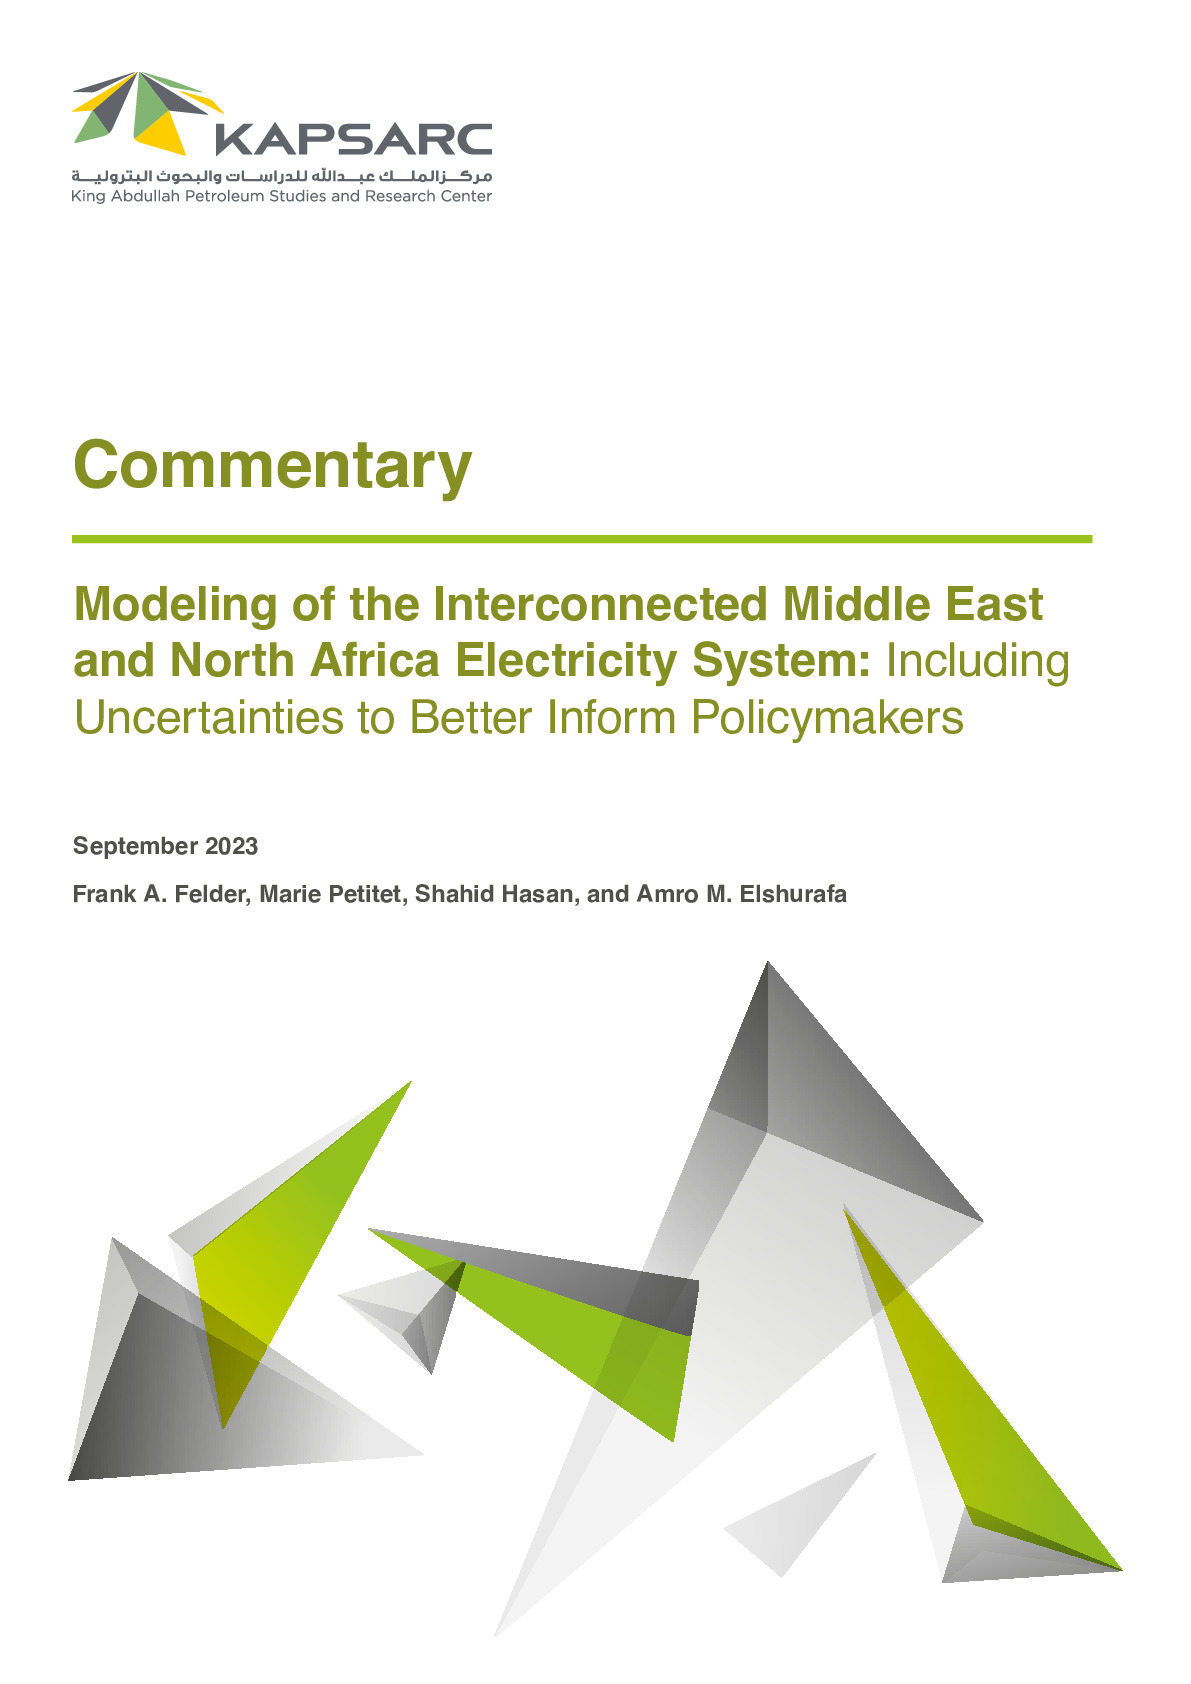 Modeling of the Interconnected Middle East and North Africa Electricity System: Including Uncertainties to Better Inform Policymakers